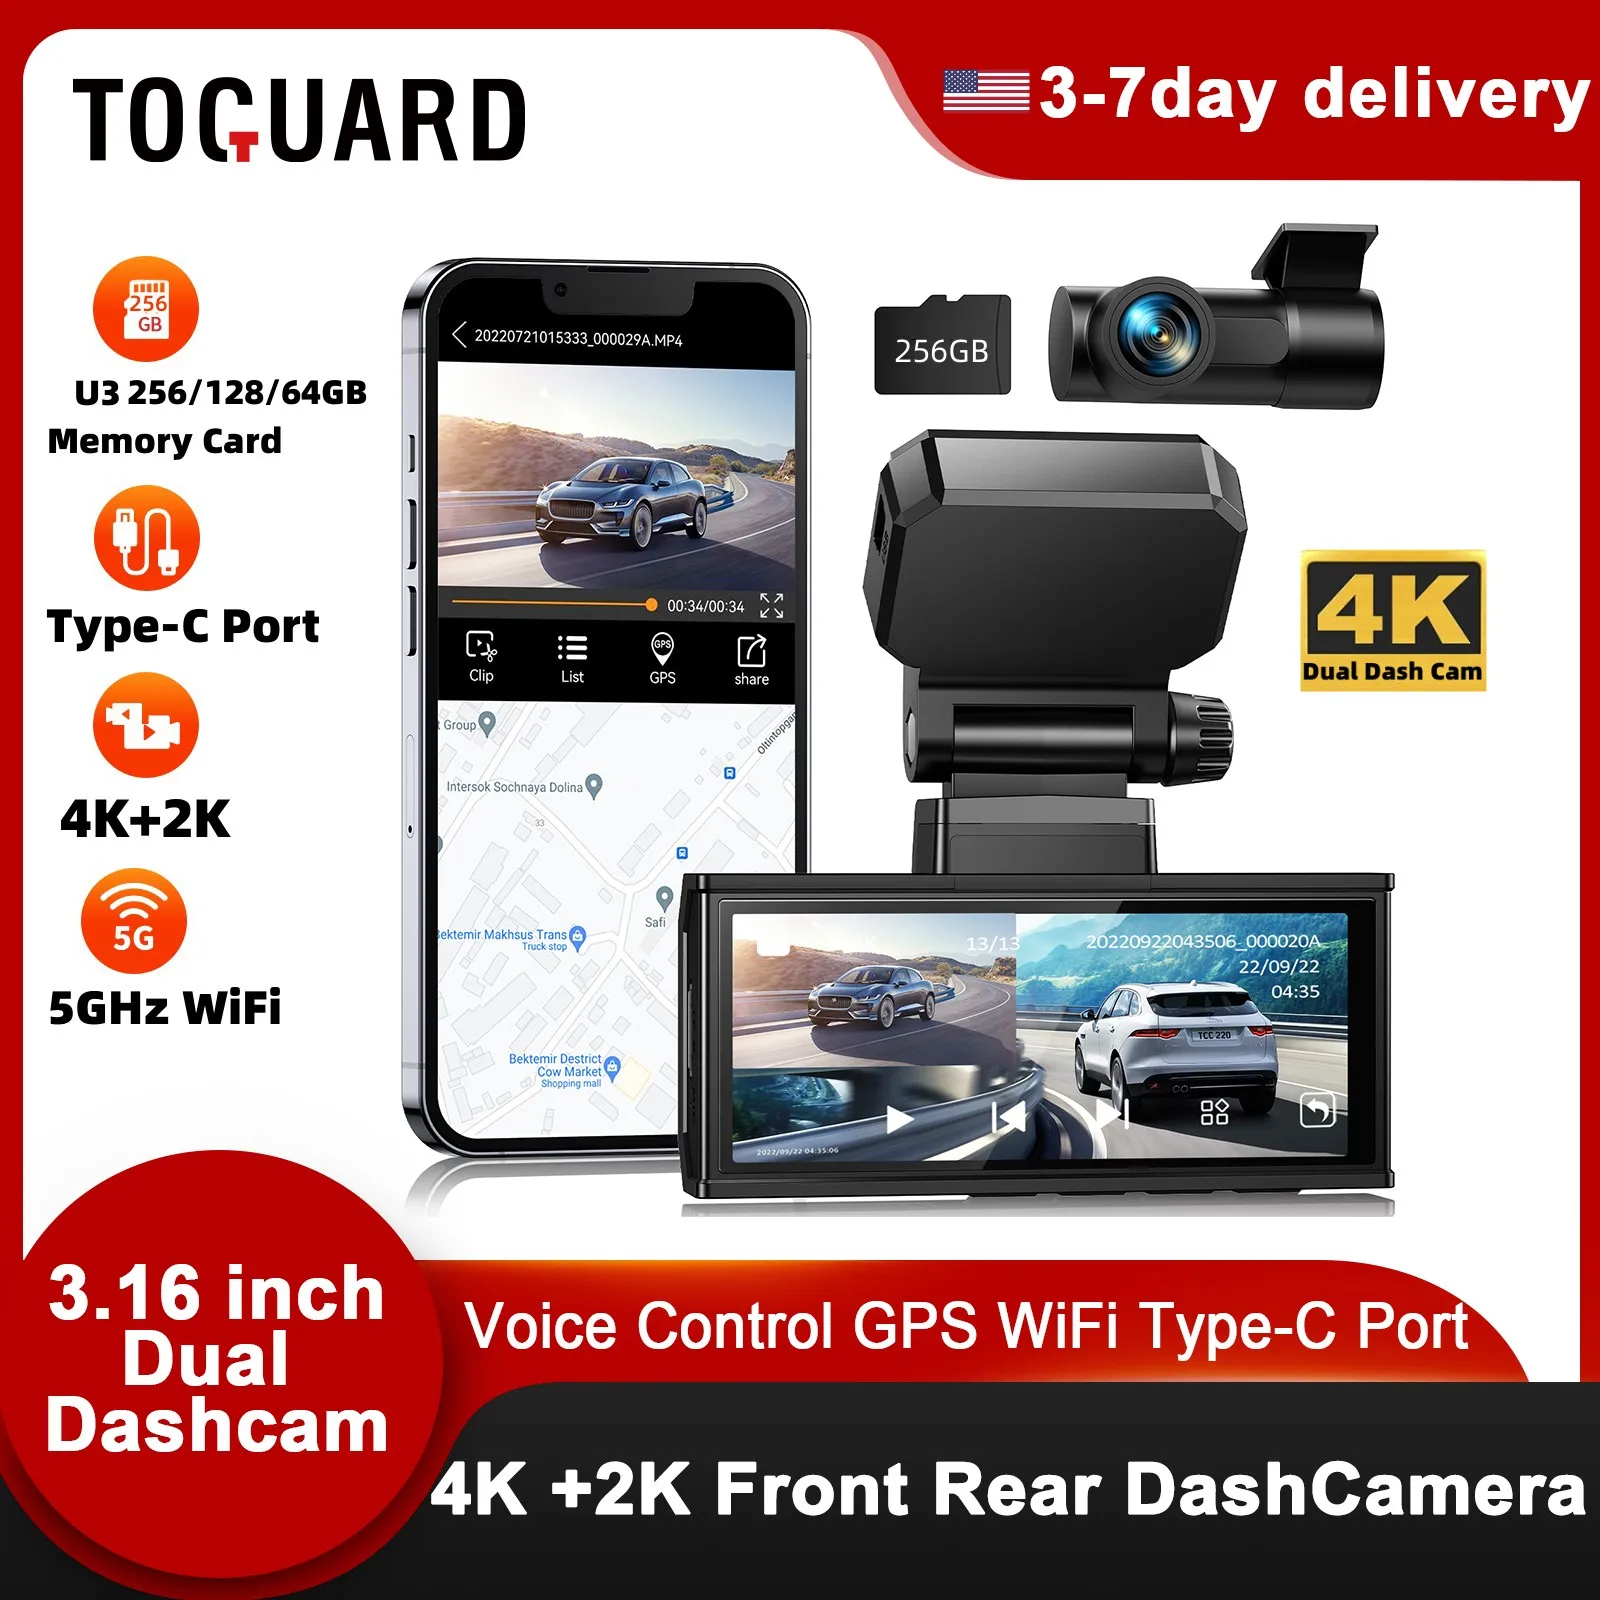 

TOGUARD 5Ghz WiFi 4K Front and 2K Rear Dash Cam, Type-C port, GPS tracking, Touch Screen, Sony Night Vision, Voice Commands